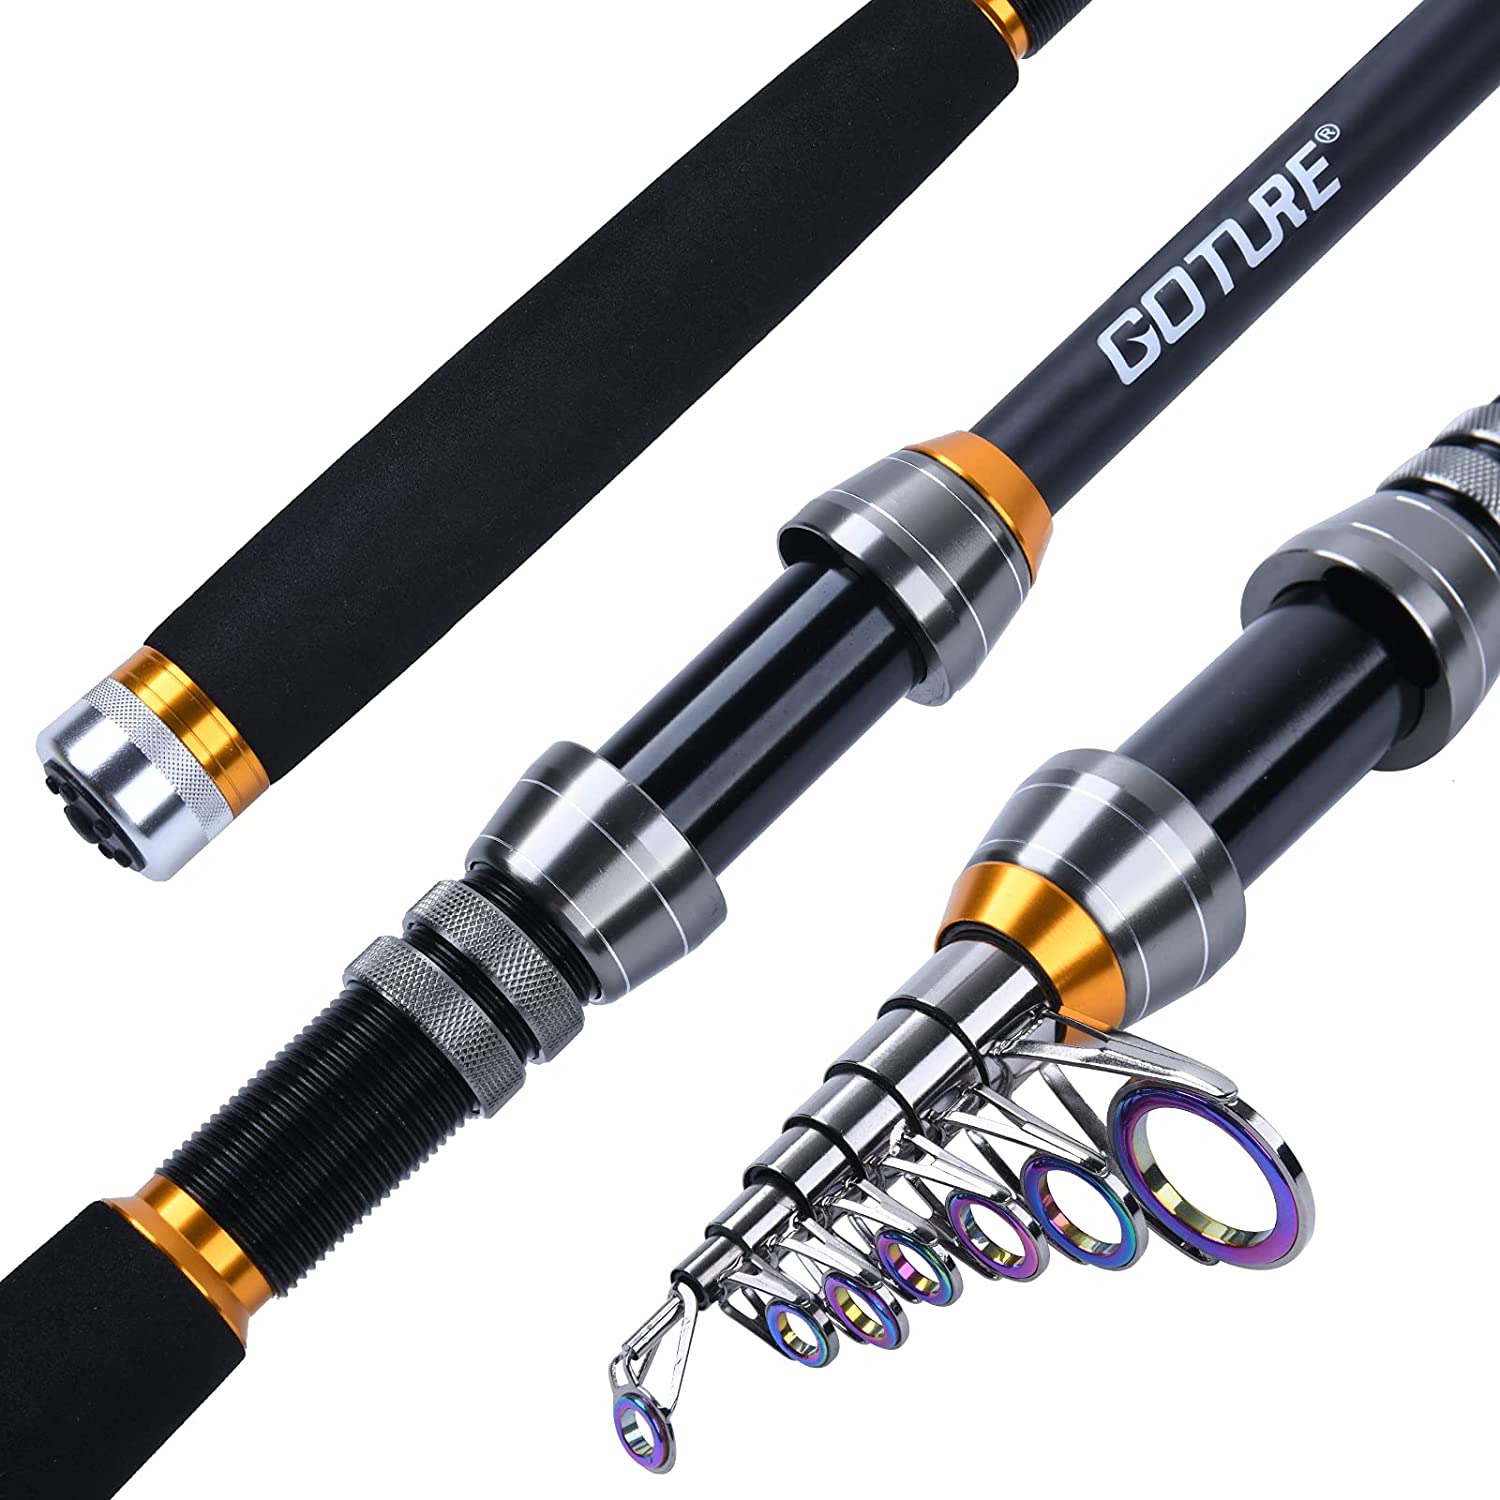 Goture Fishing Rod for Beginners, Carbon Telescopic, Portable, 4.9